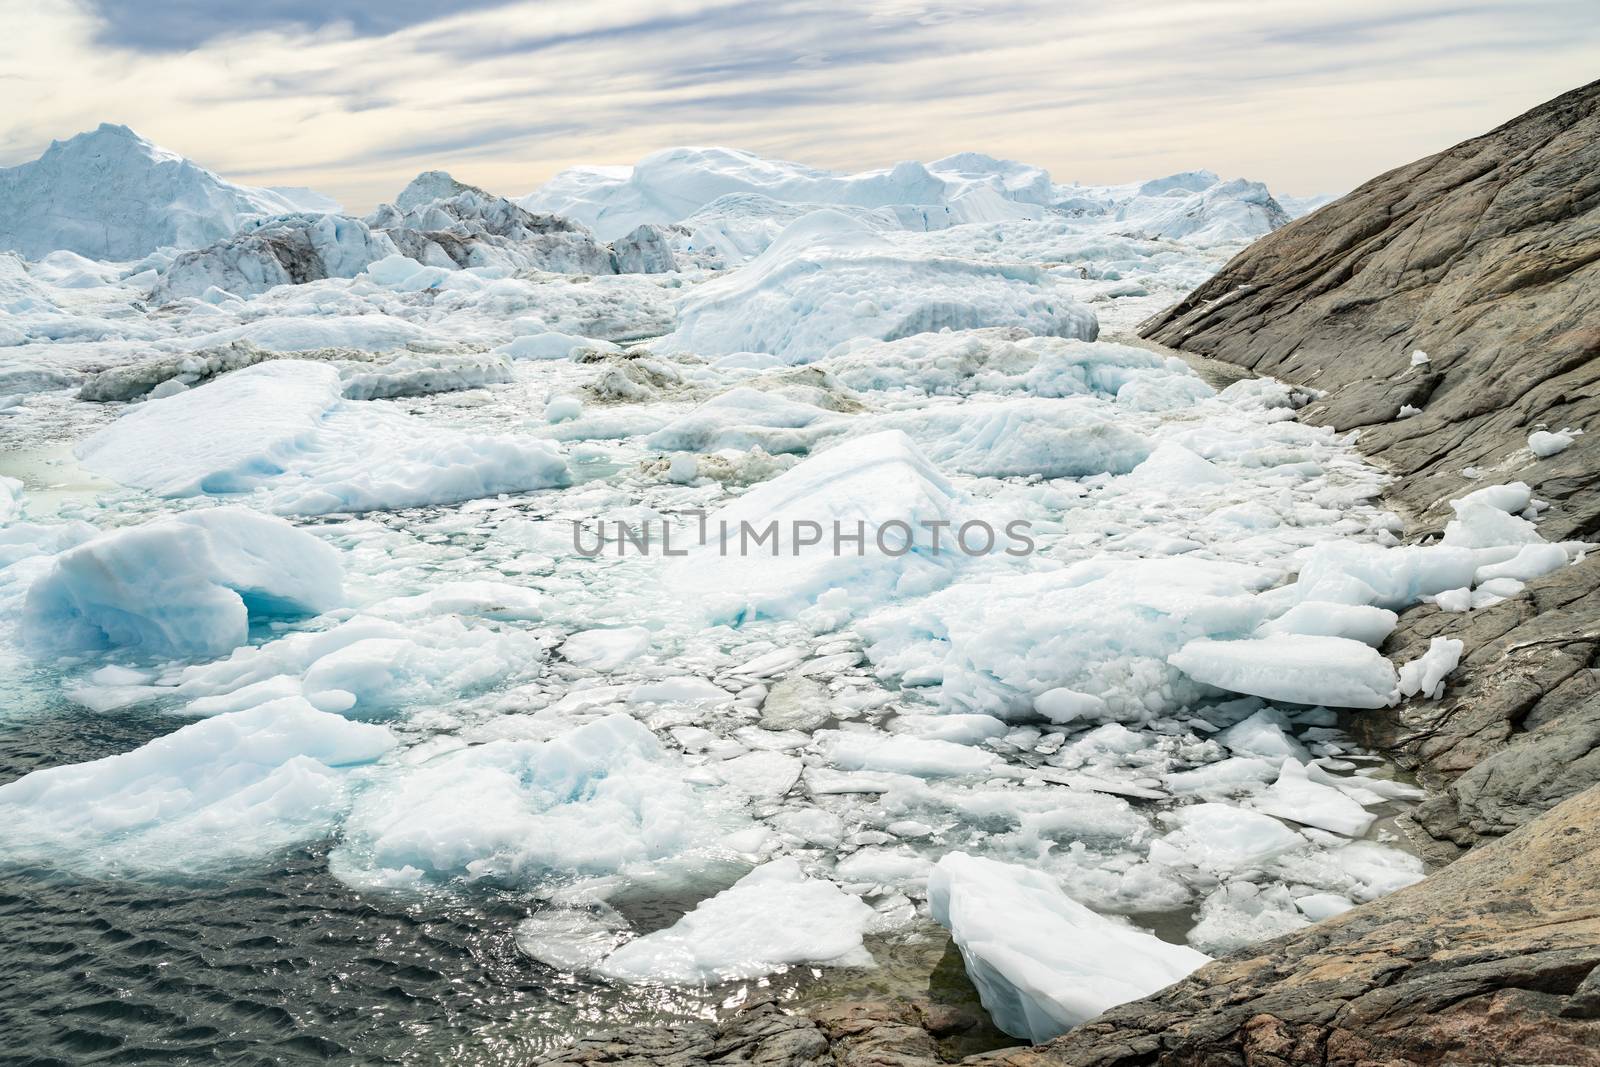 Global warming - Greenland Iceberg landscape of Ilulissat icefjord with giant icebergs. Icebergs from melting glacier. Arctic nature heavily affected by climate change.